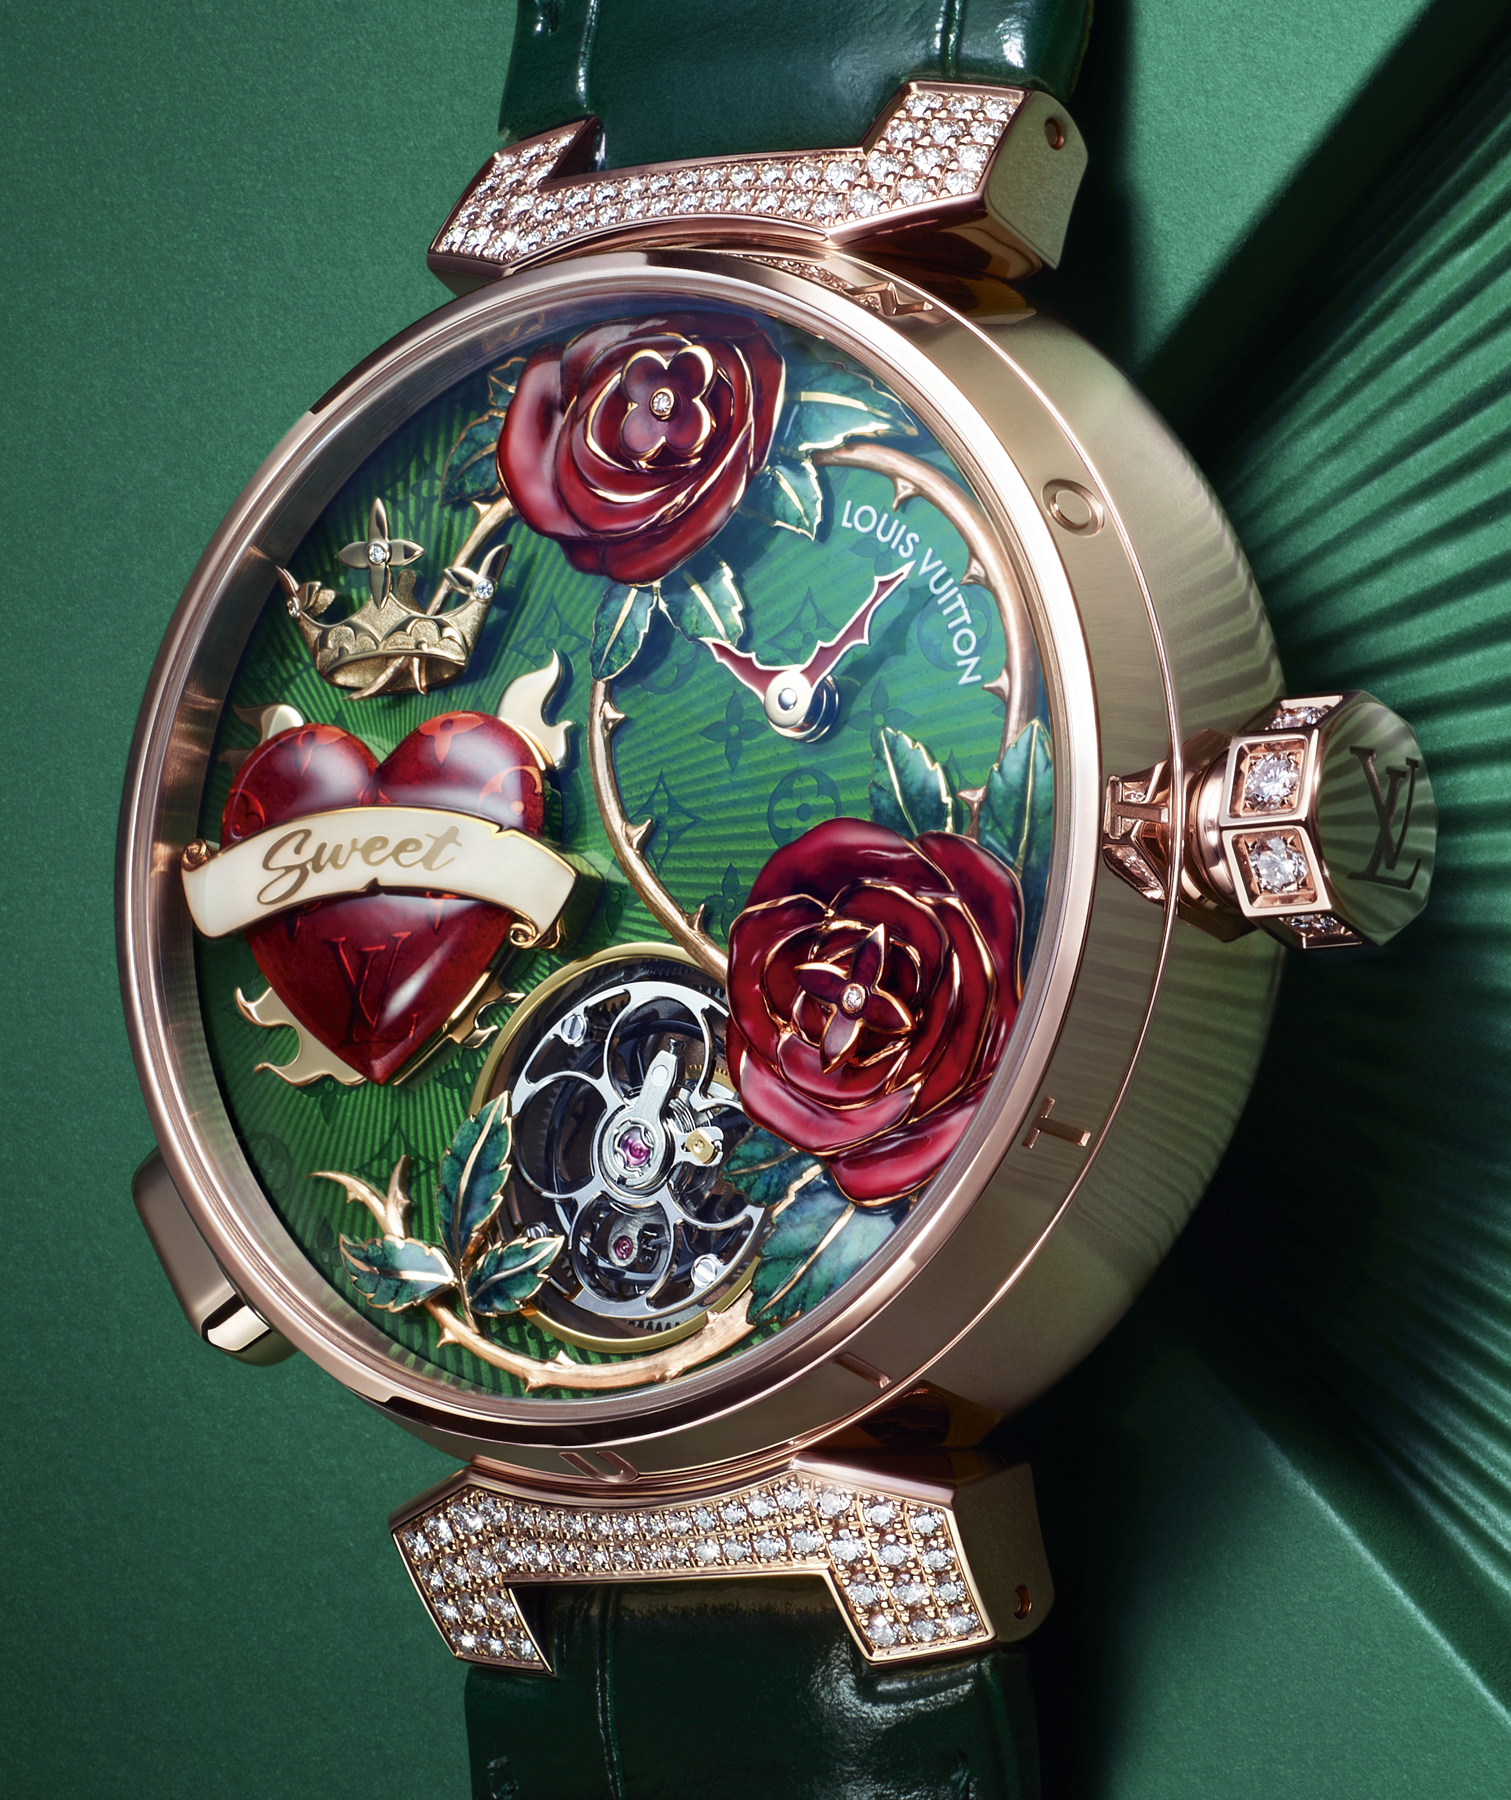 Louis Vuitton Goes Full Automata With Three High Watchmaking